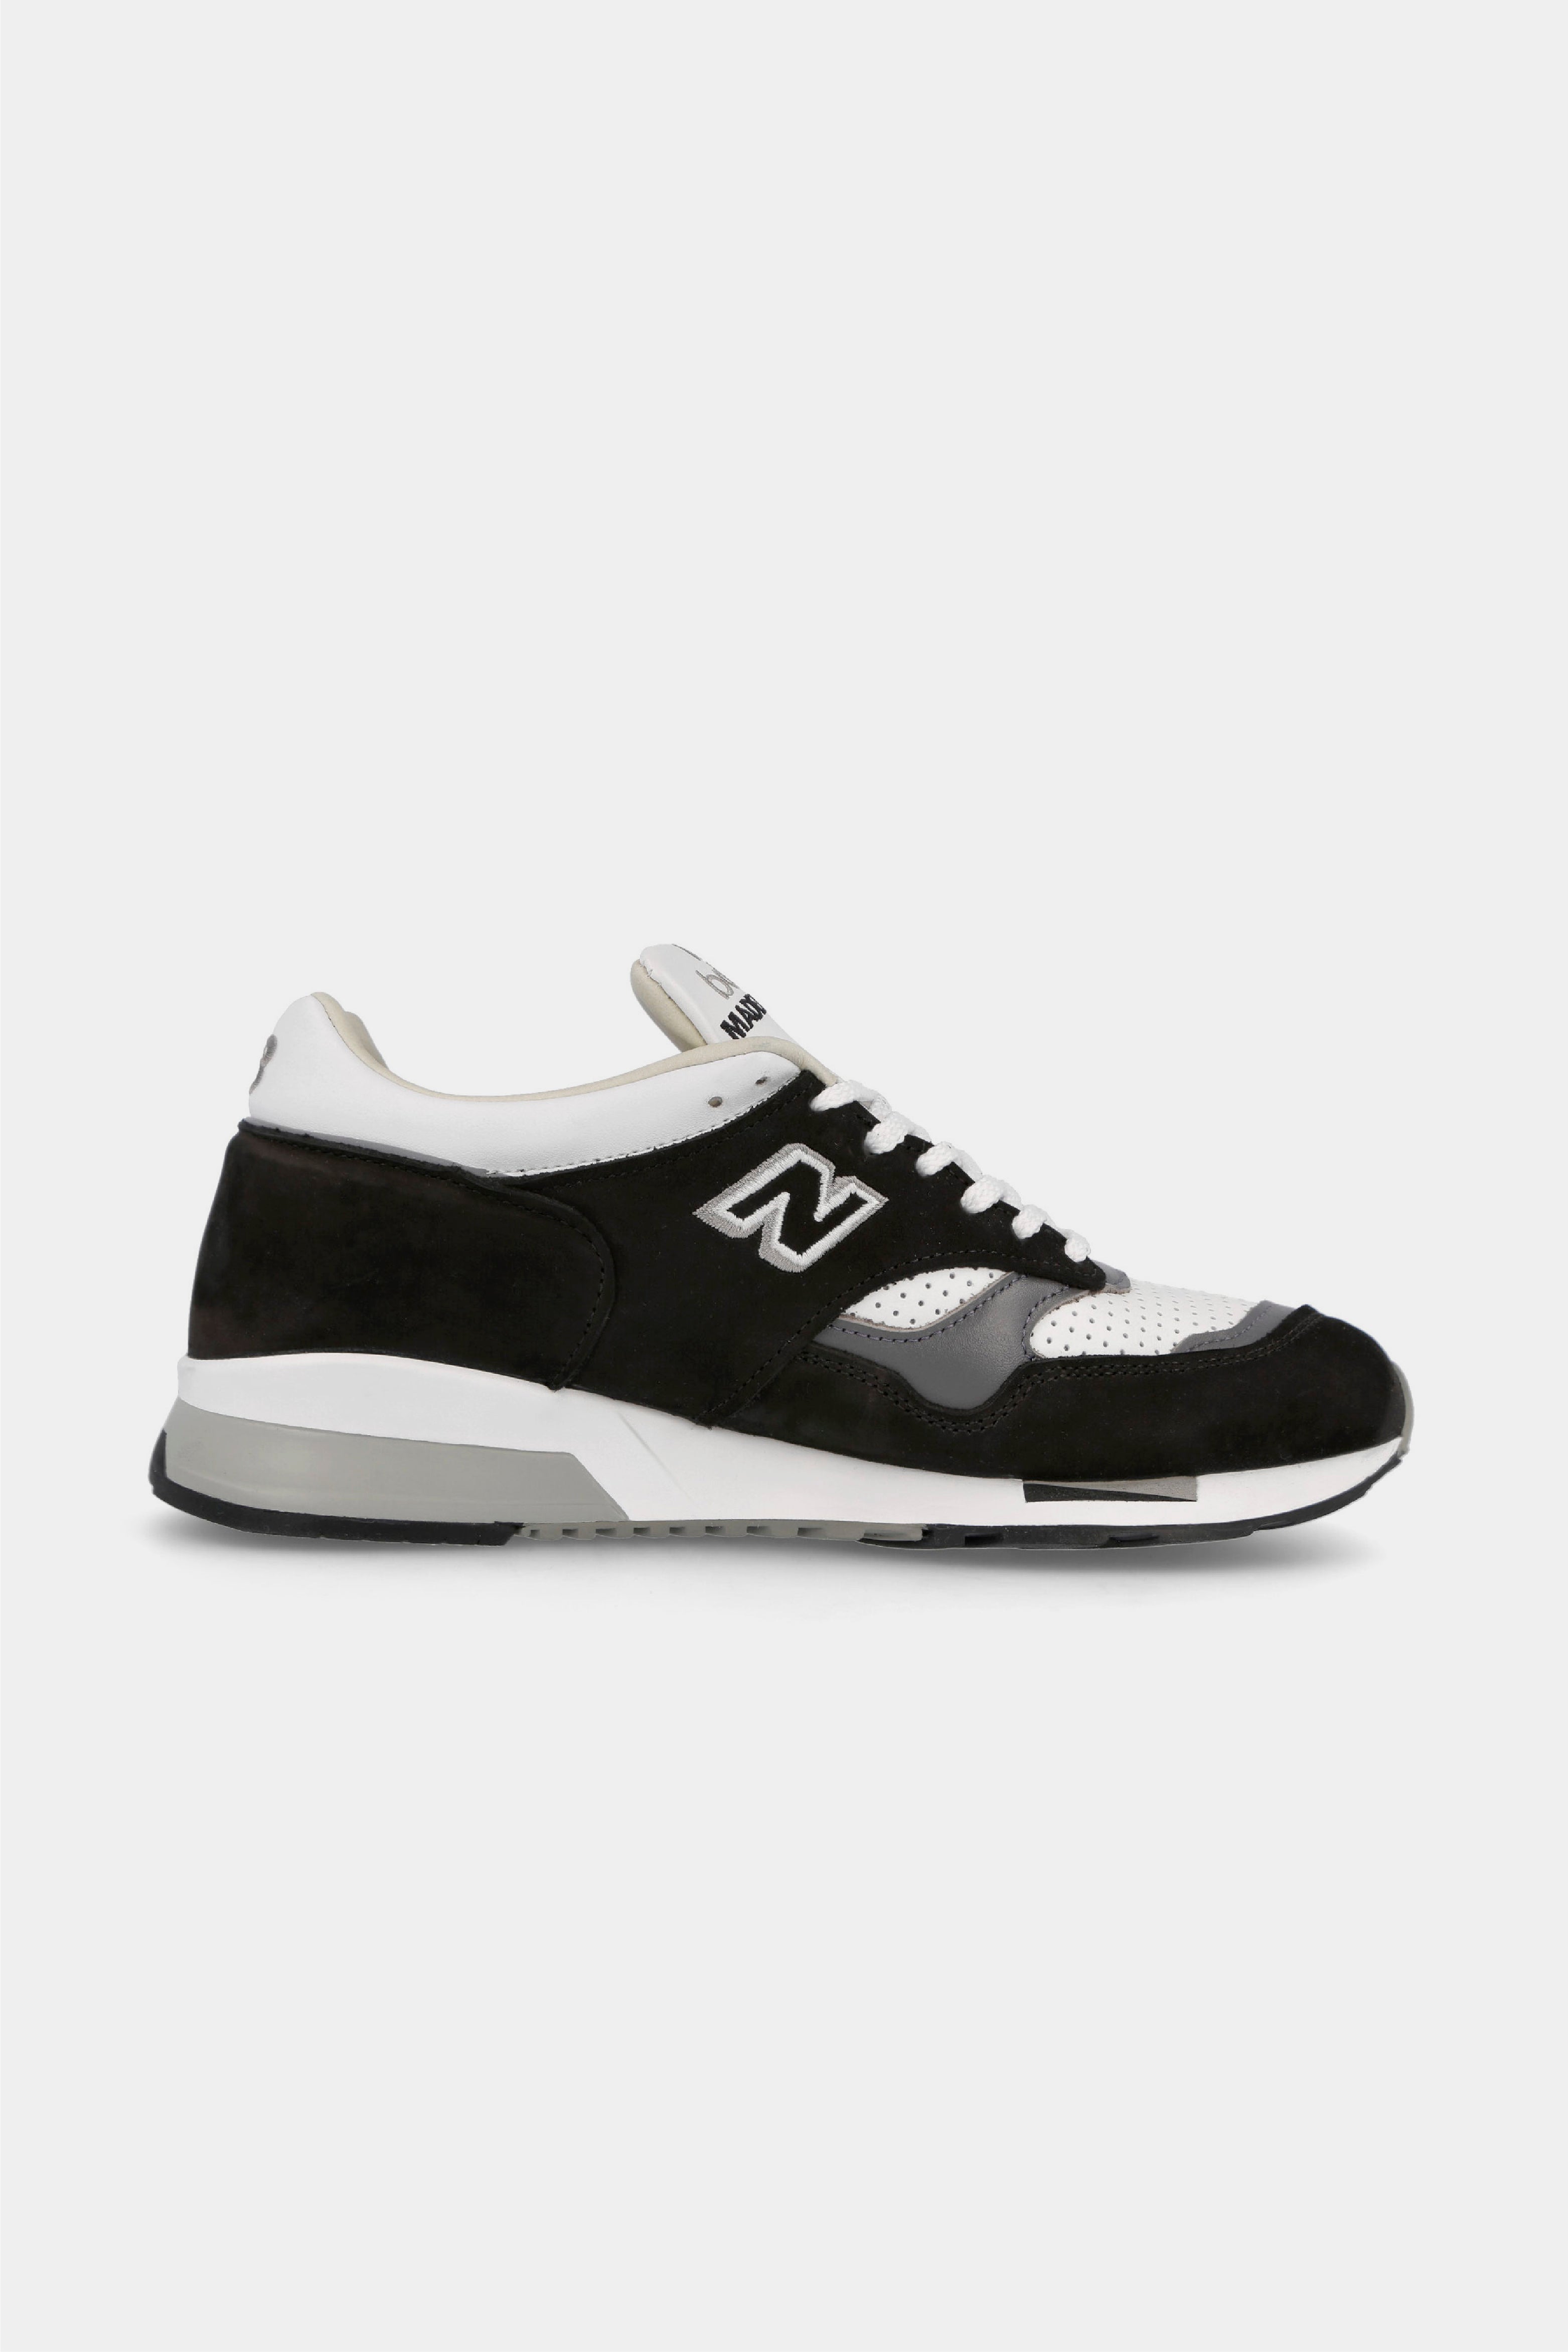 Selectshop FRAME - NEW BALANCE 1500 Made In England Footwear Concept Store Dubai